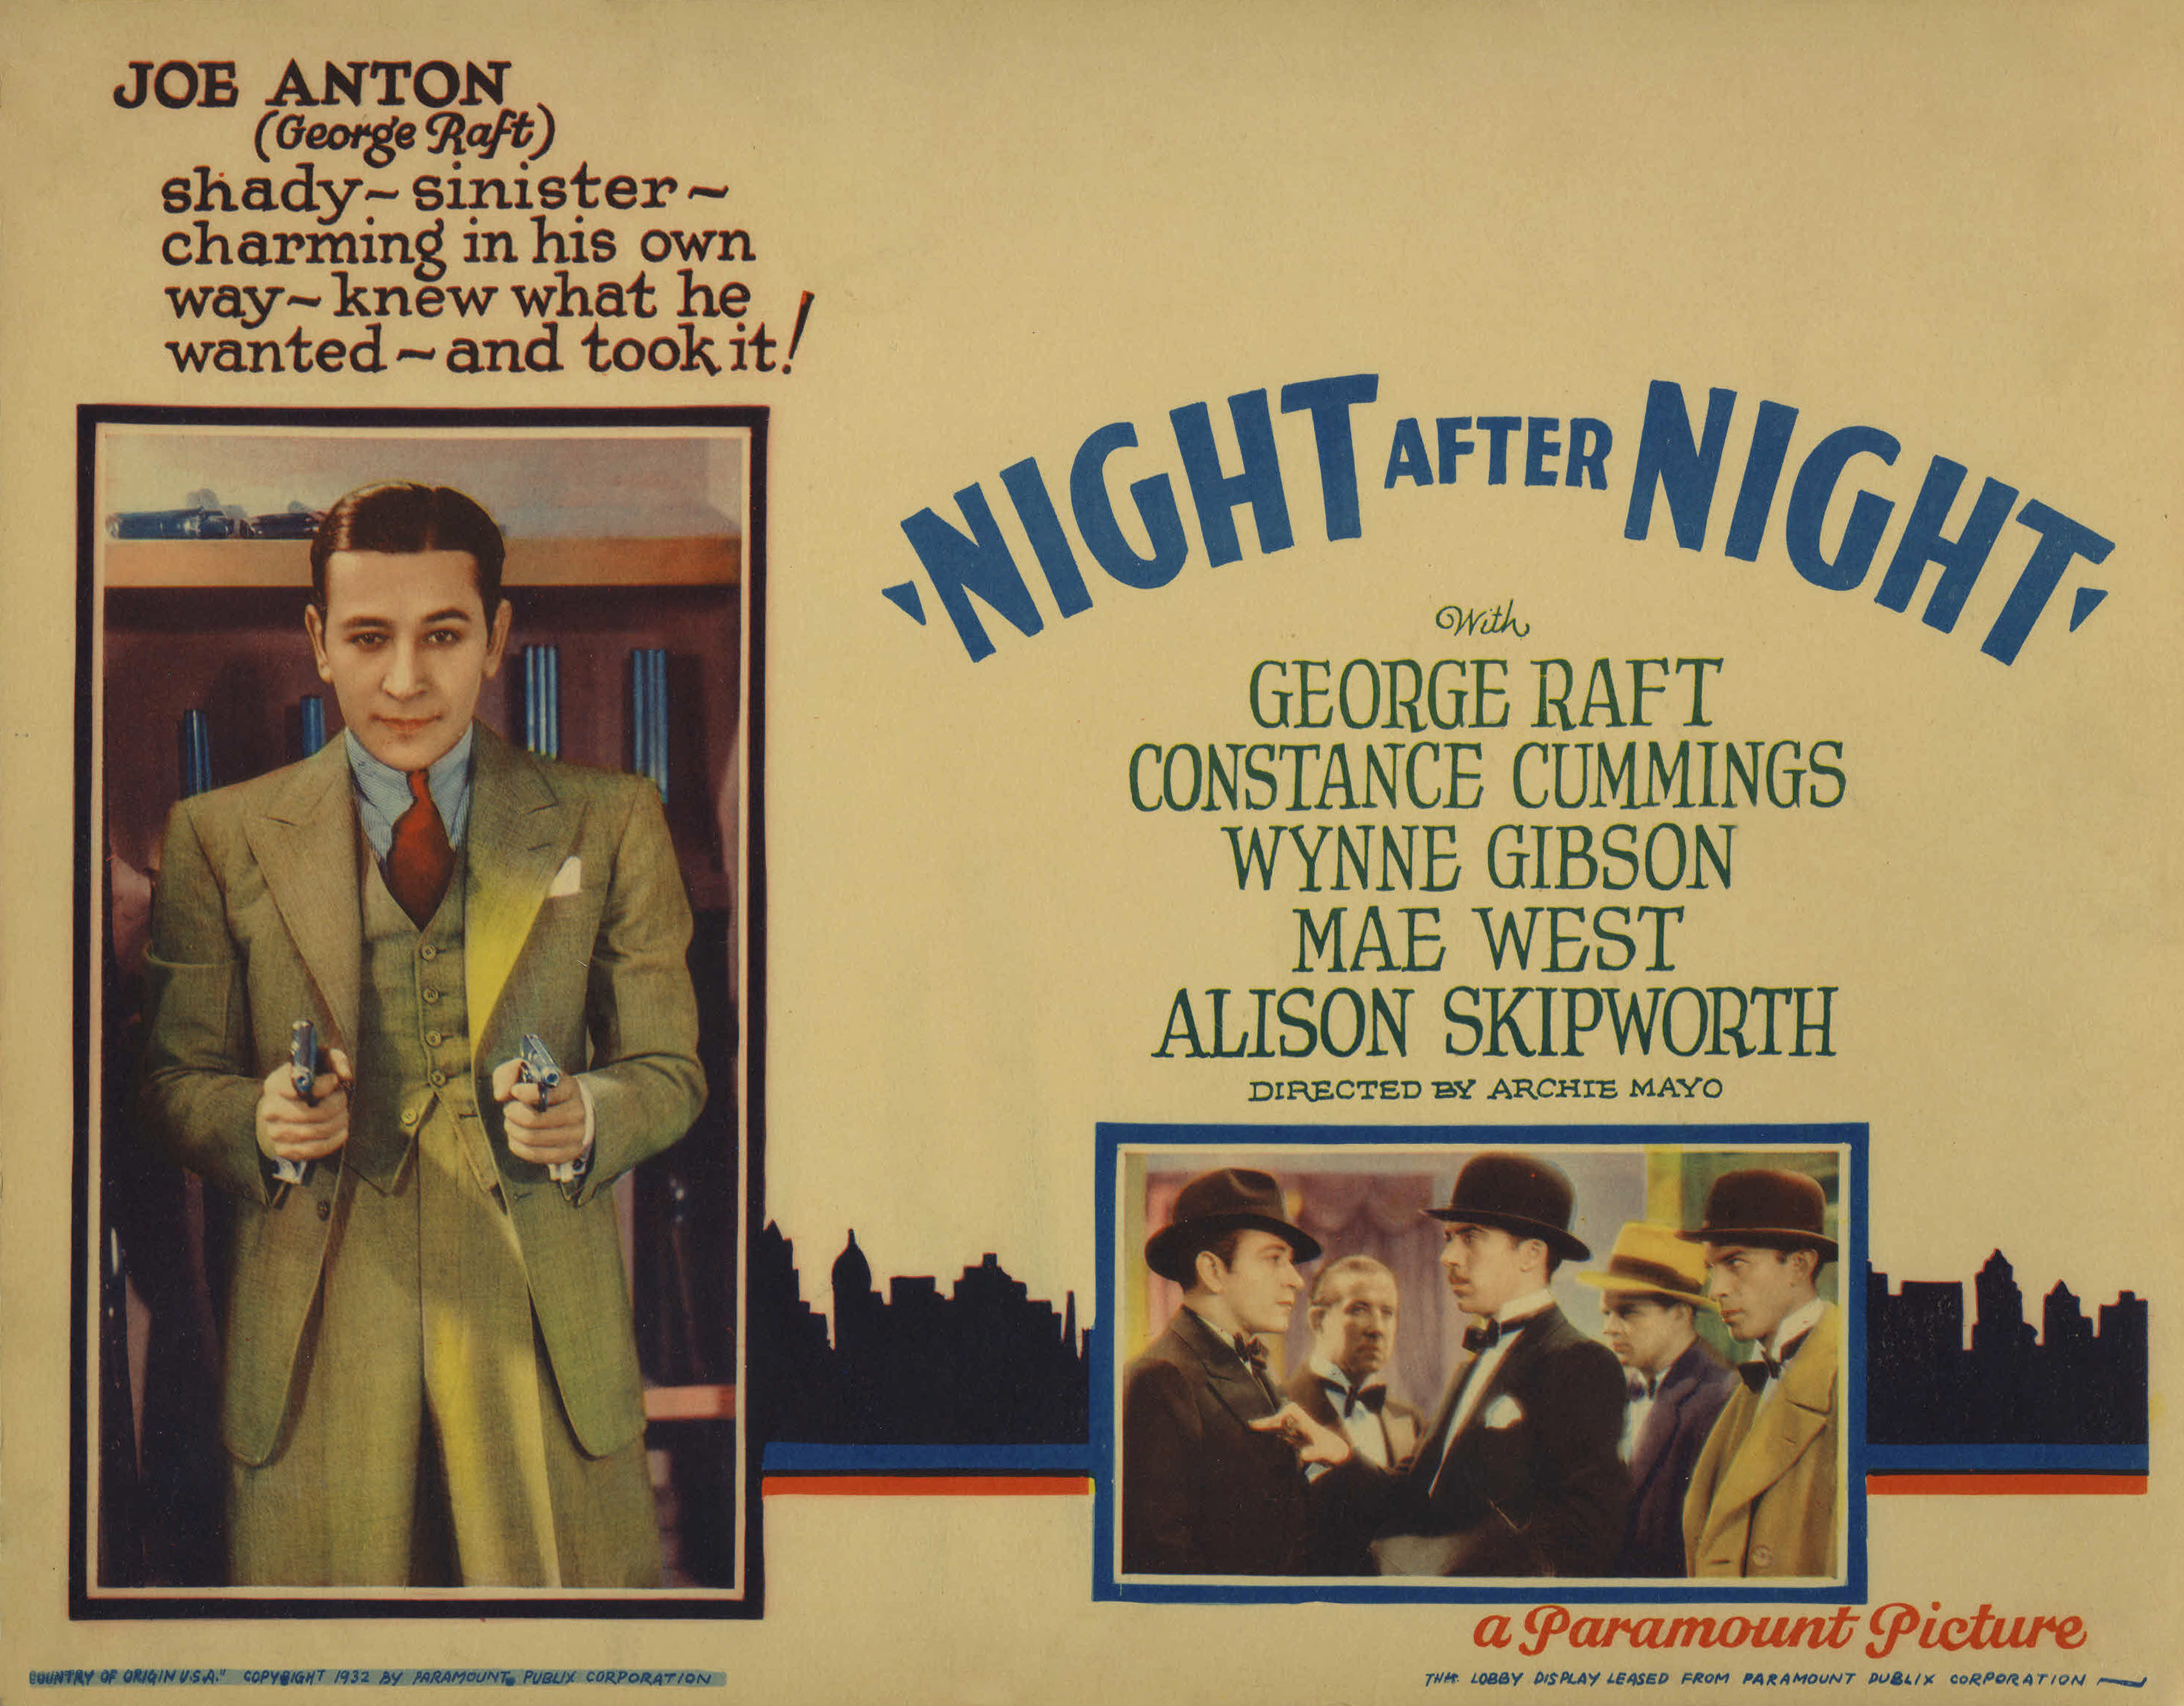 I By Day, You By Night [1932]